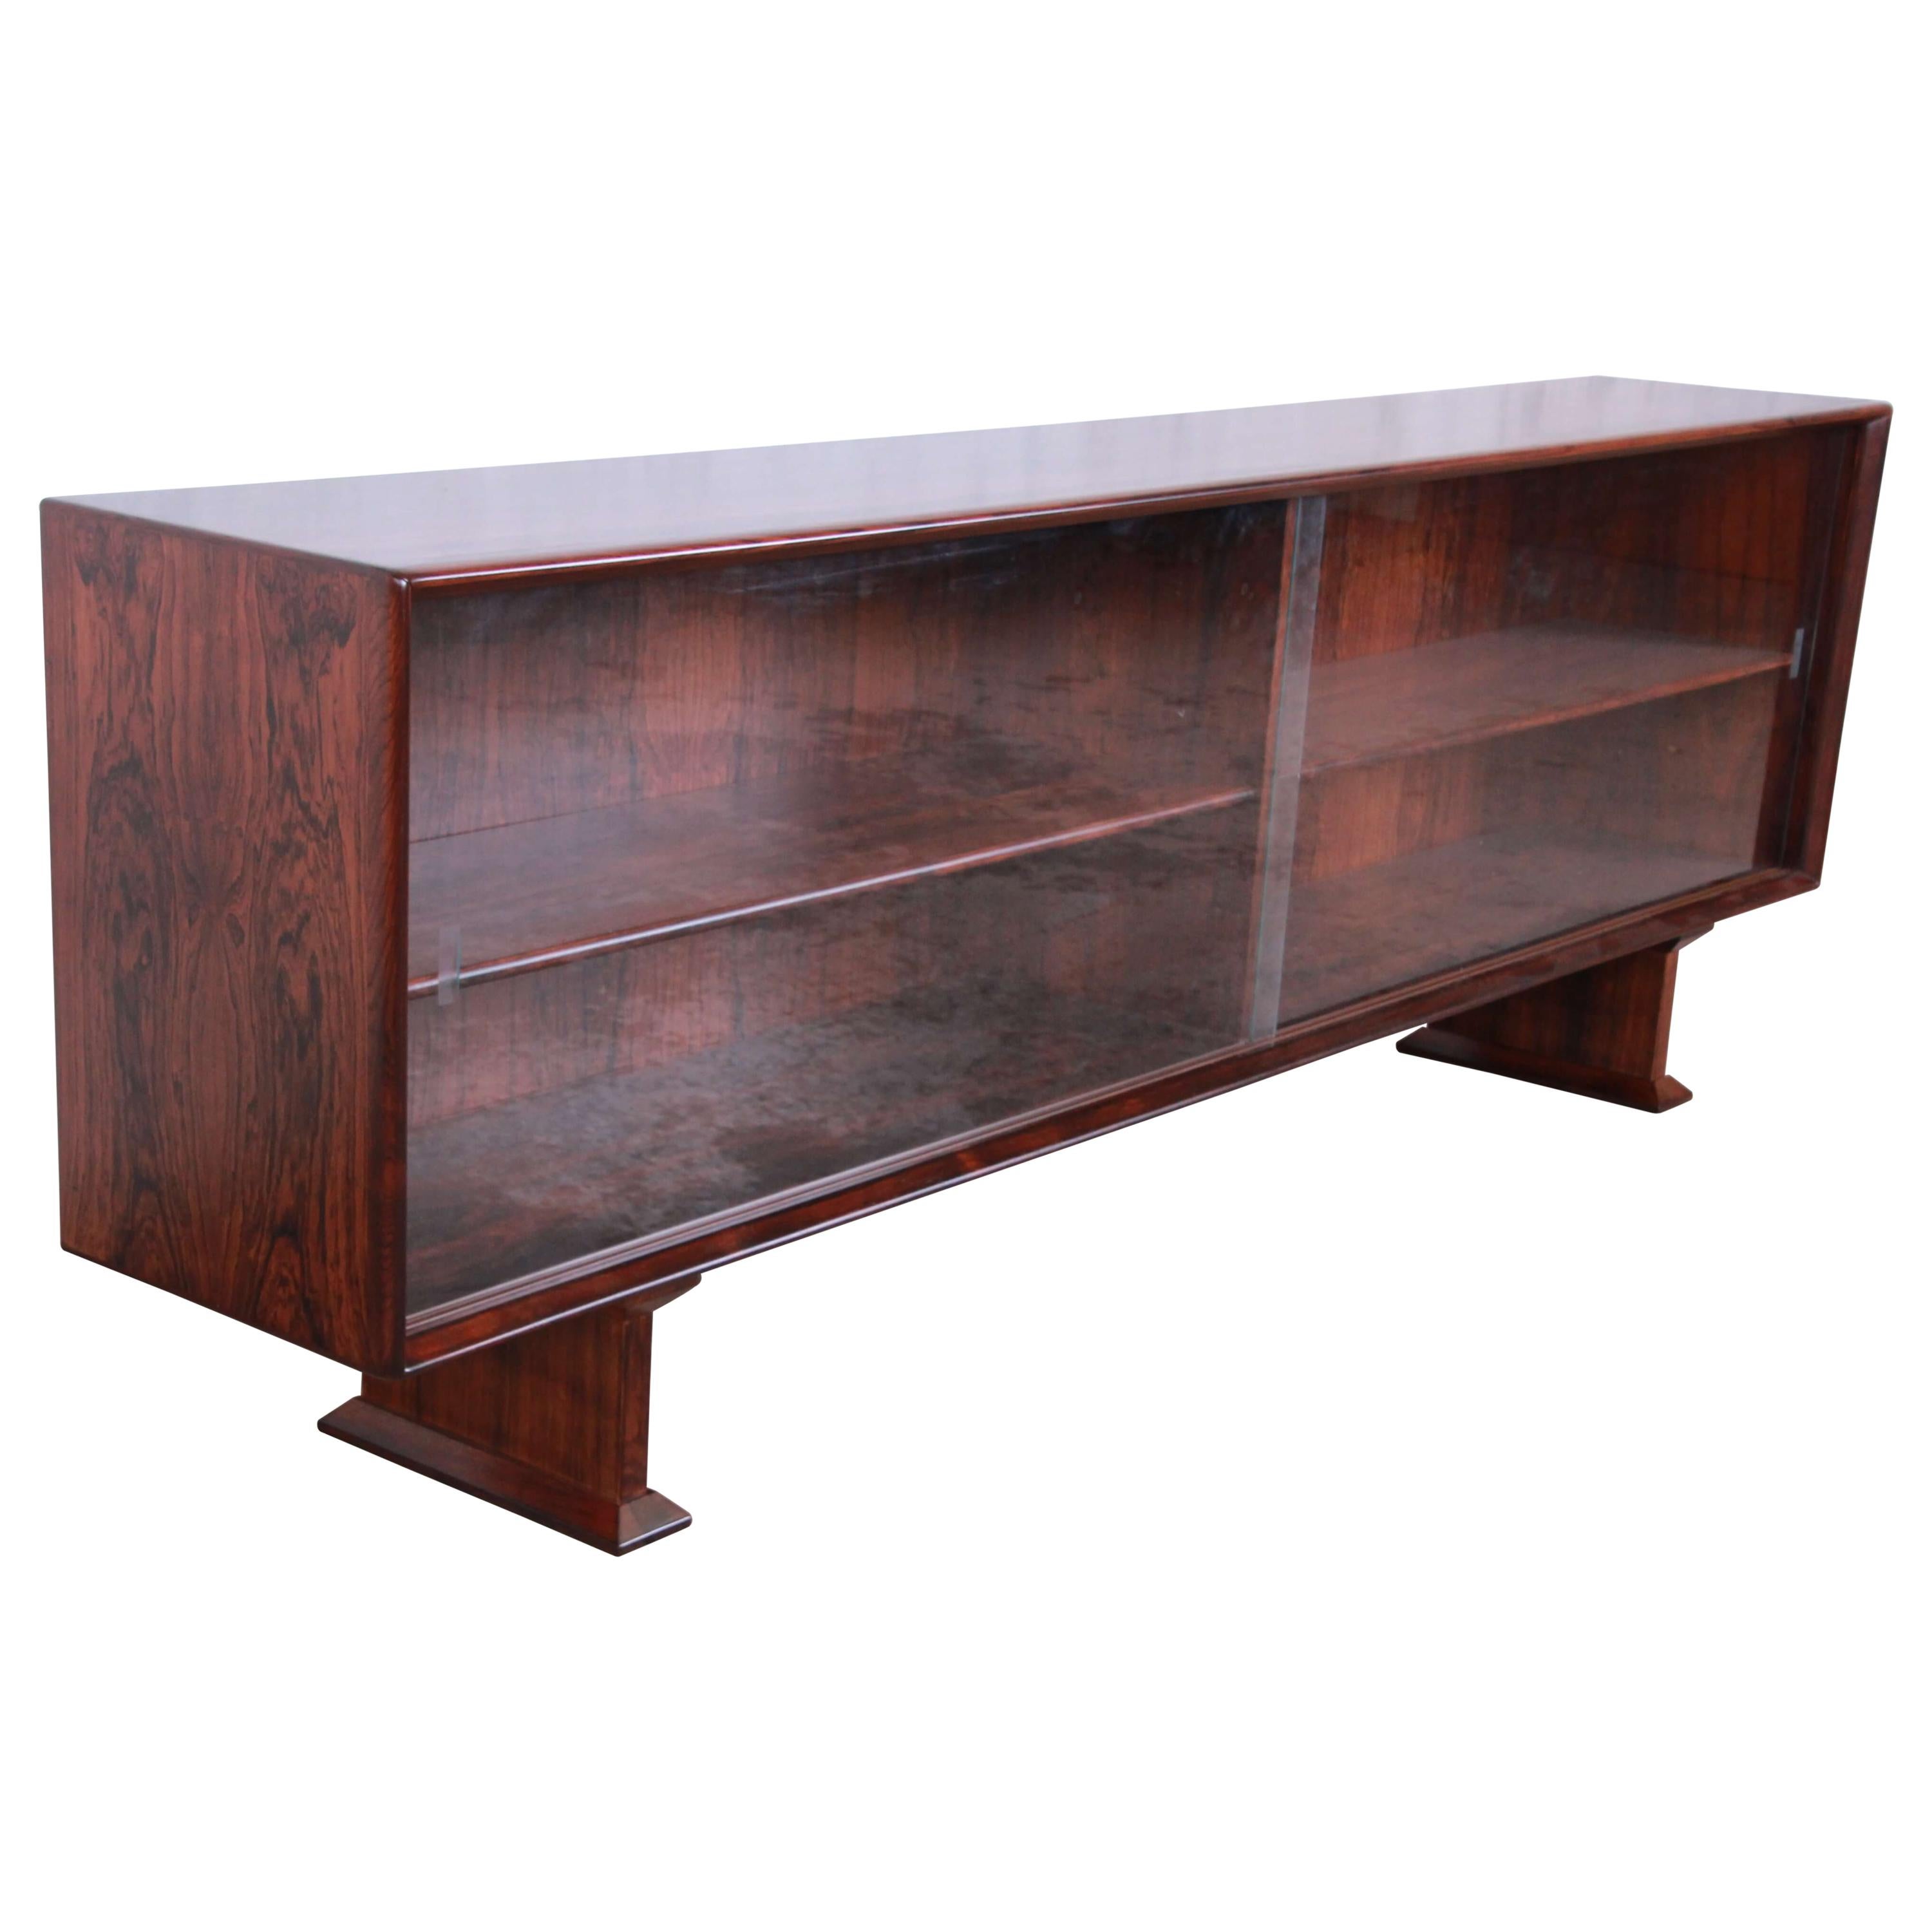 Danish Modern Rosewood Glass Front Bookcase or Credenza